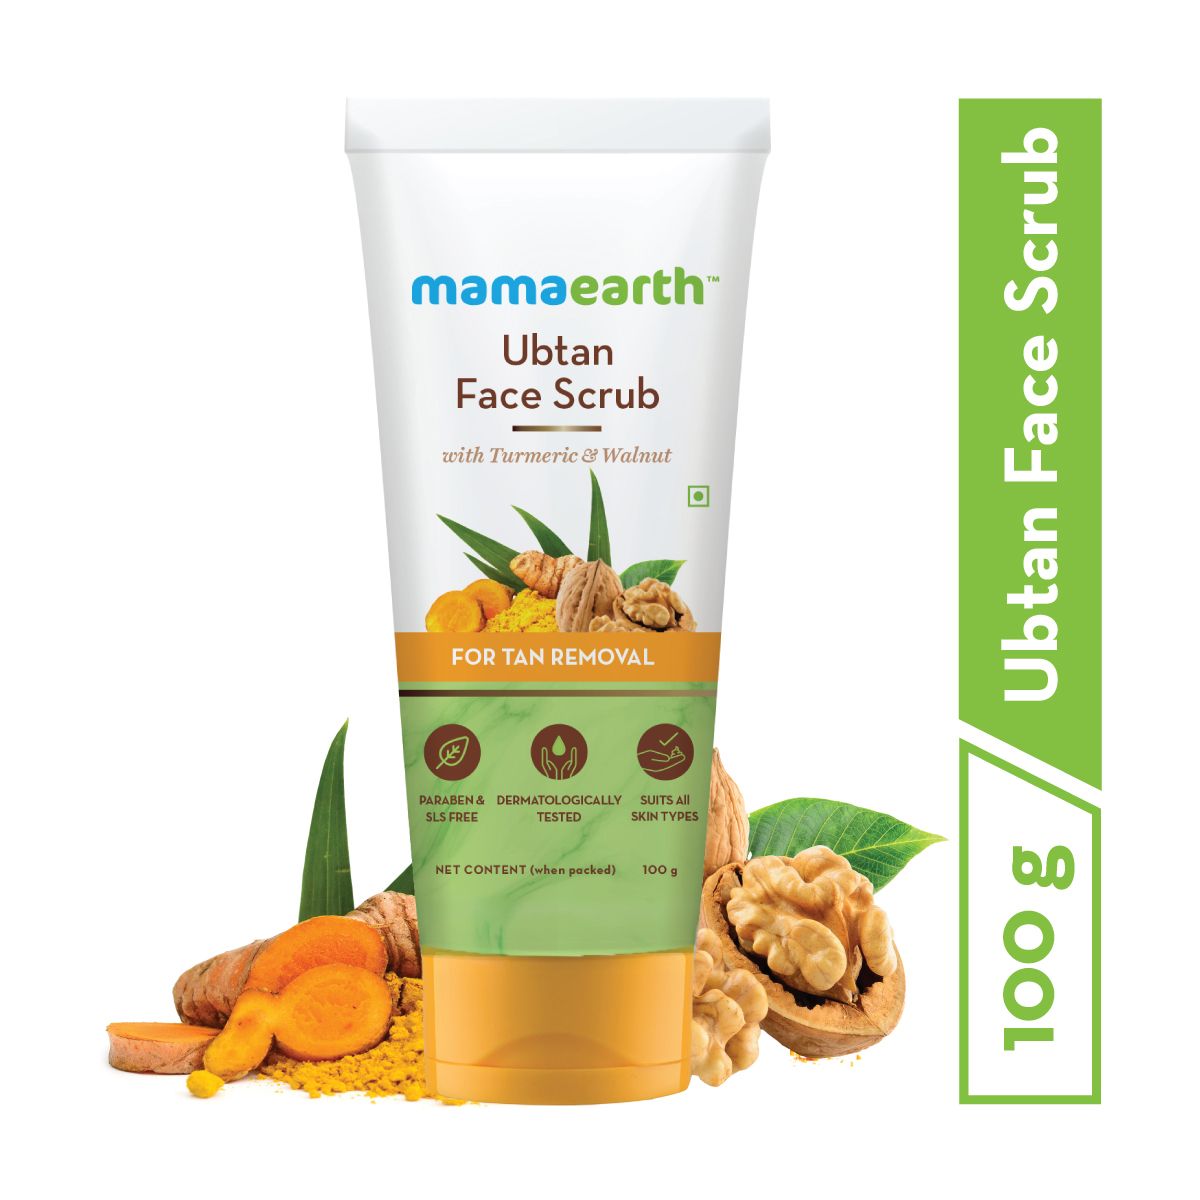 Why is Mamaearth Face Masks Better than other Masks available in the market?